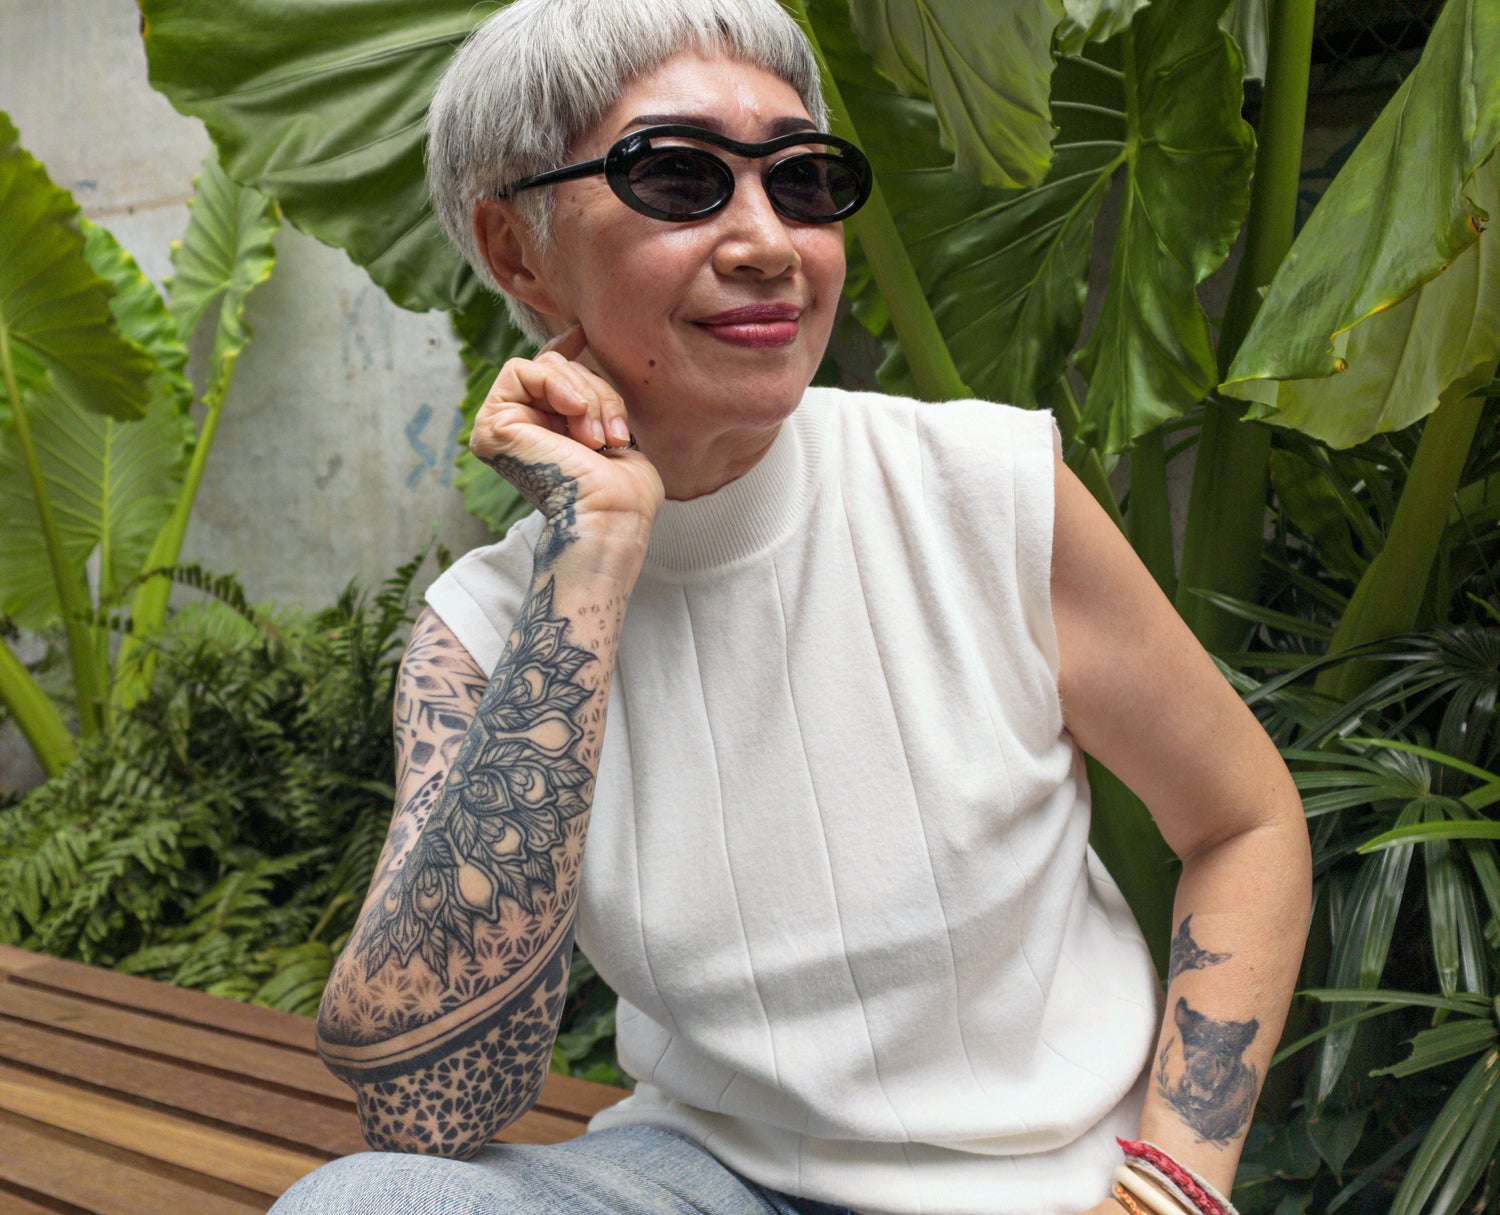 An elderly woman with tattoos smiles while sitting on a bench, wearing sunglasses, a sleeveless white top, and jeans, in a lush garden setting